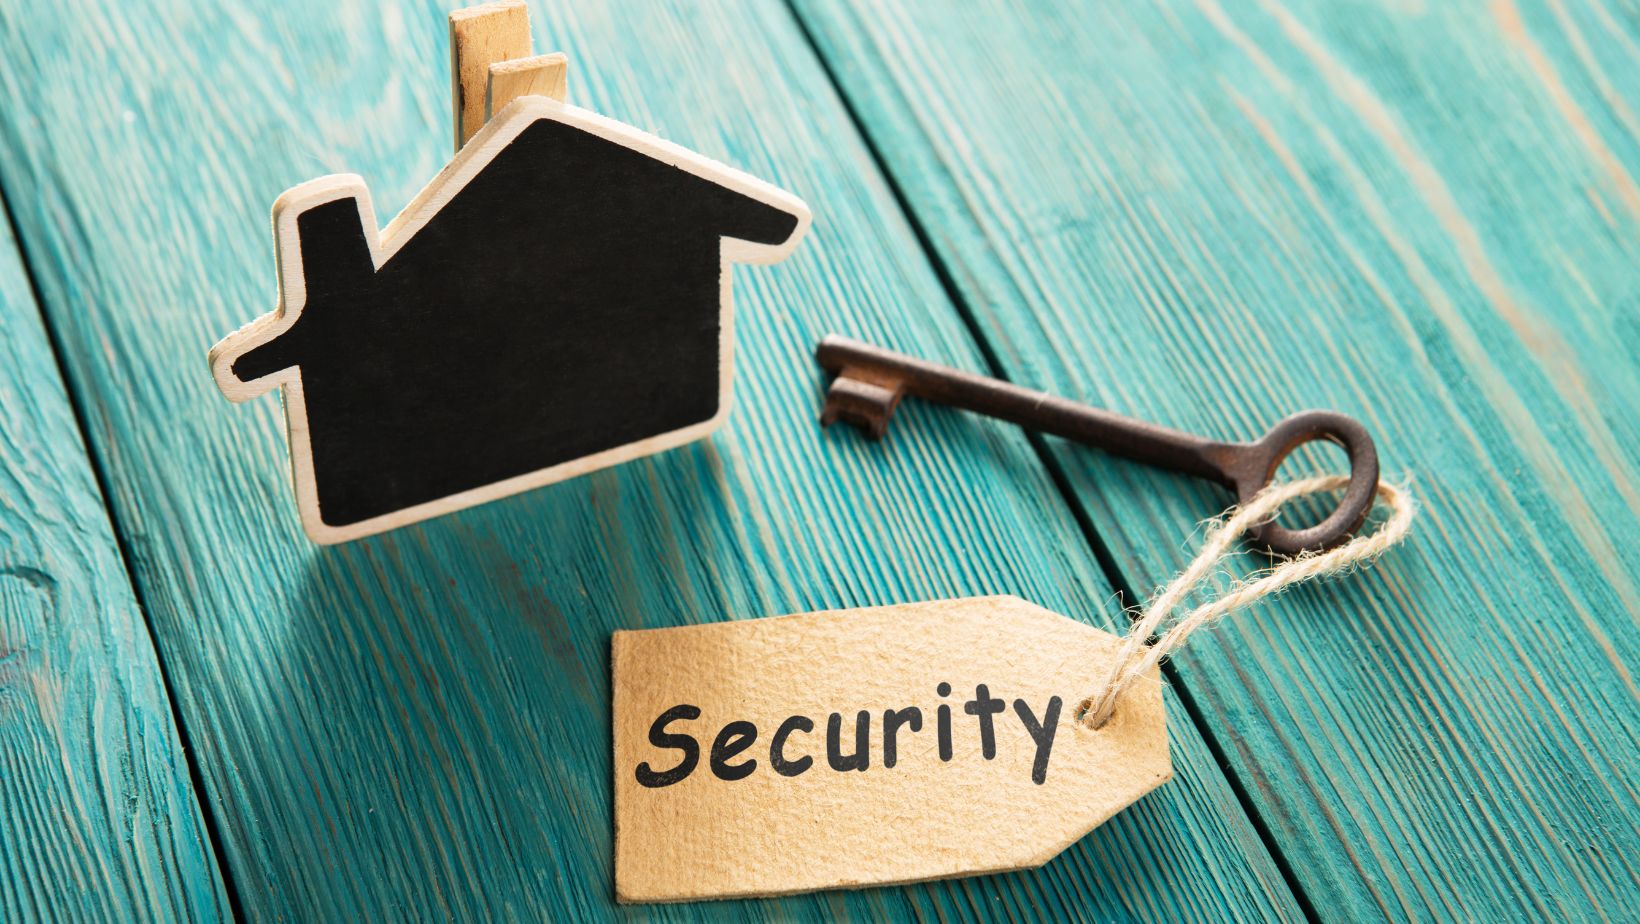 The best home security tips for over the holidays